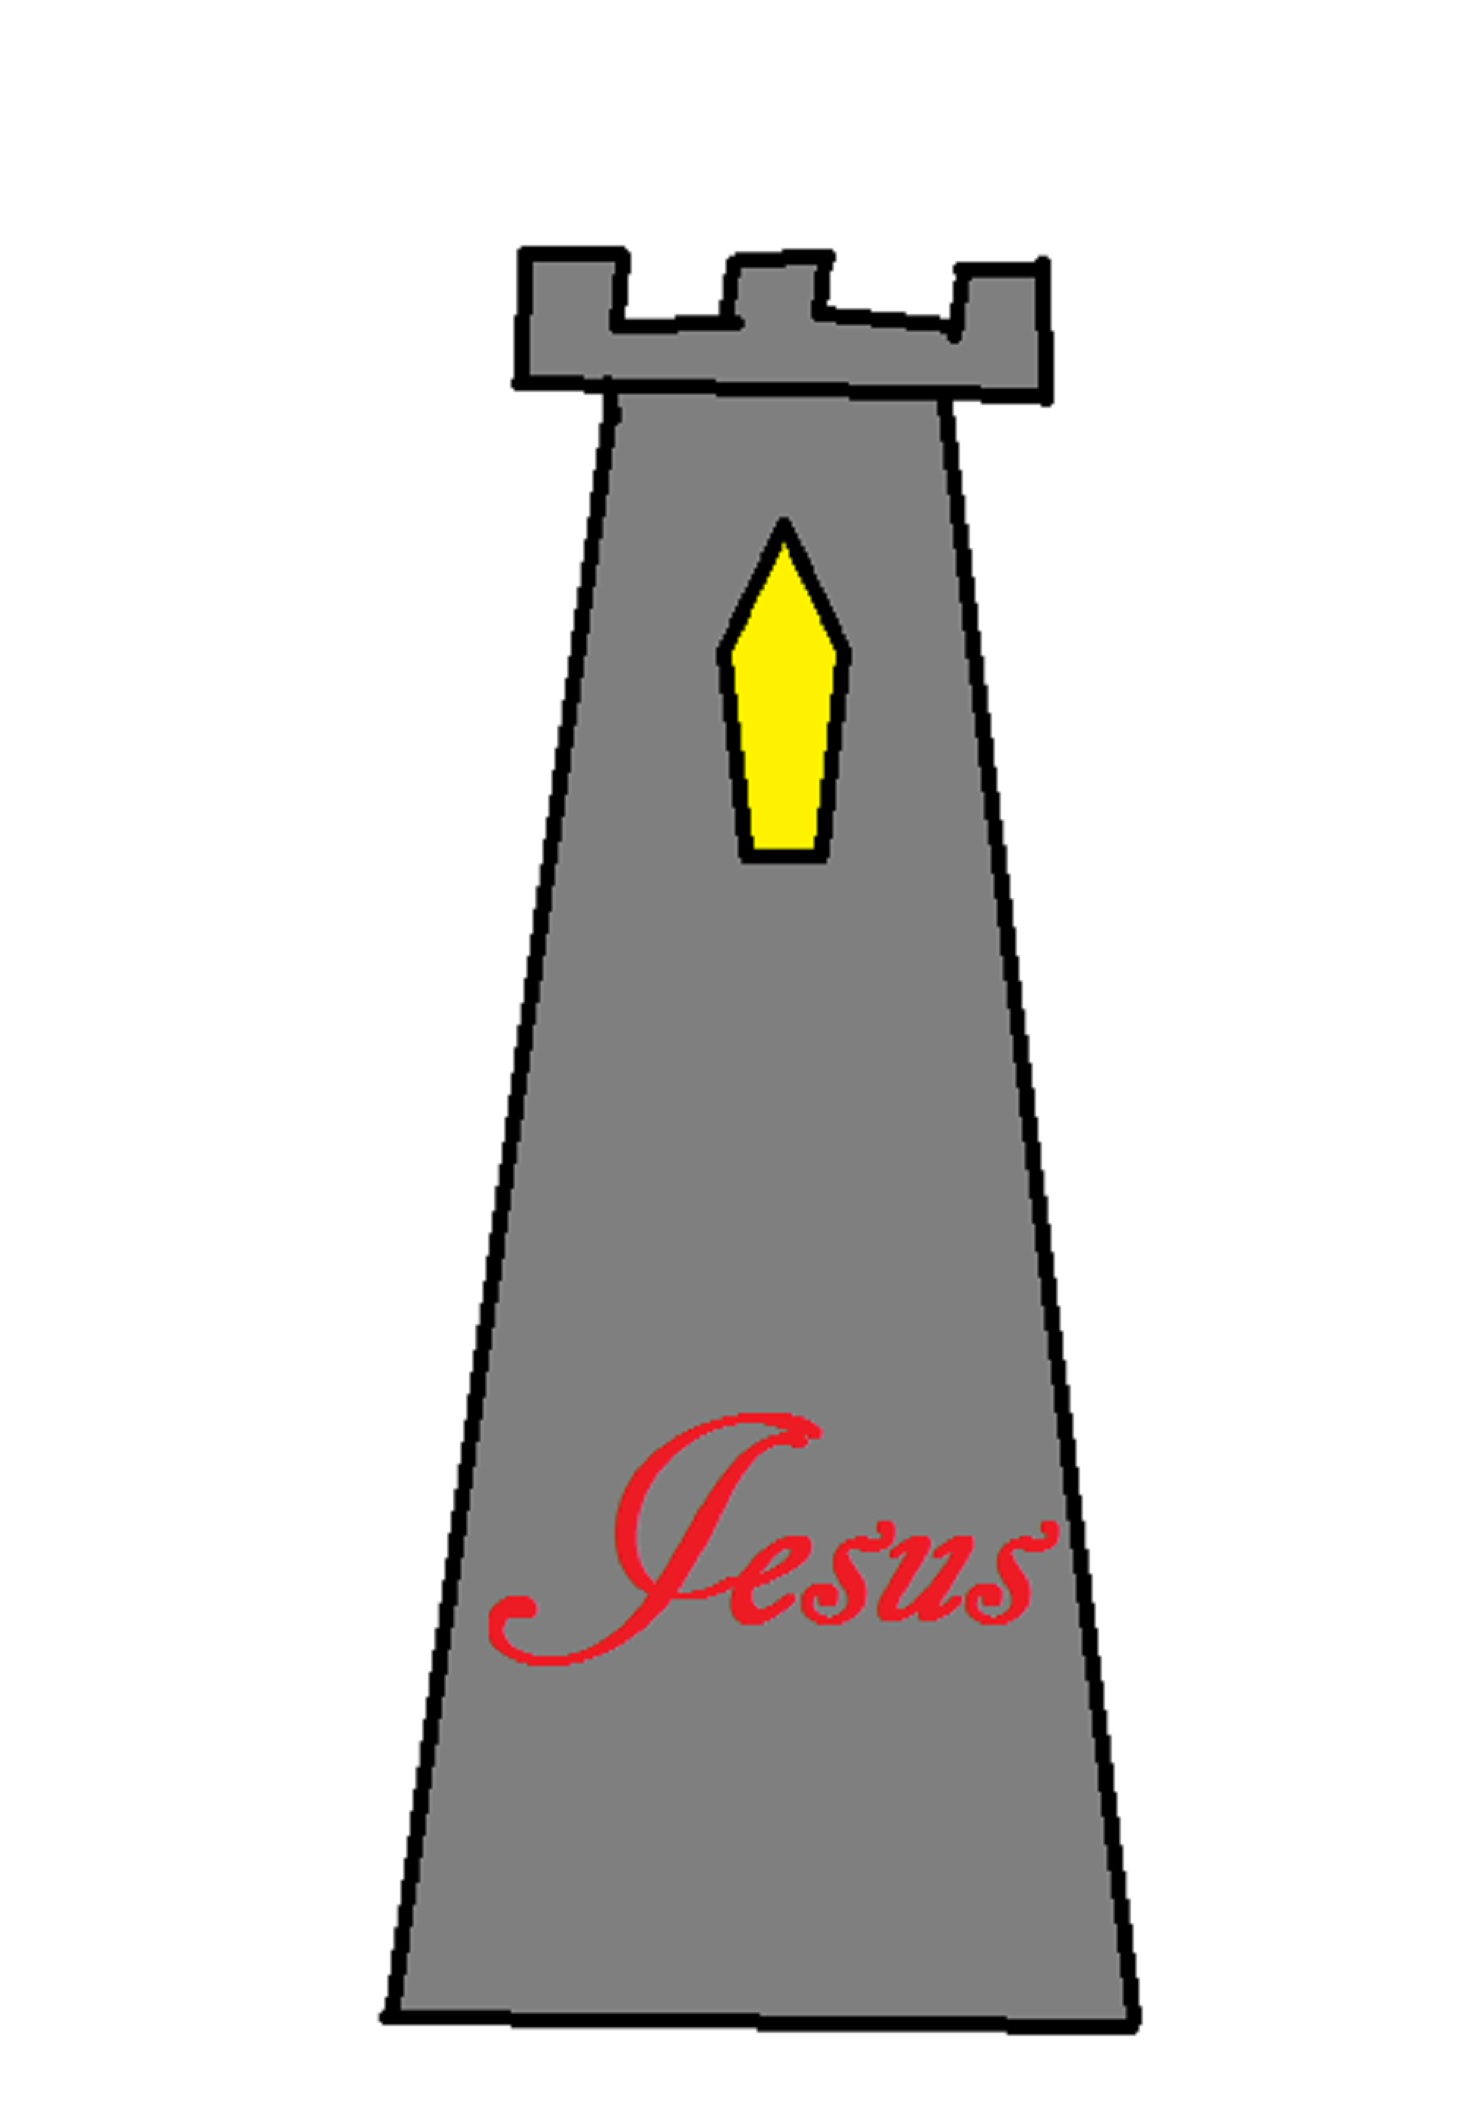 Jesus is my strong tower -- created by me on Microsoft Paint